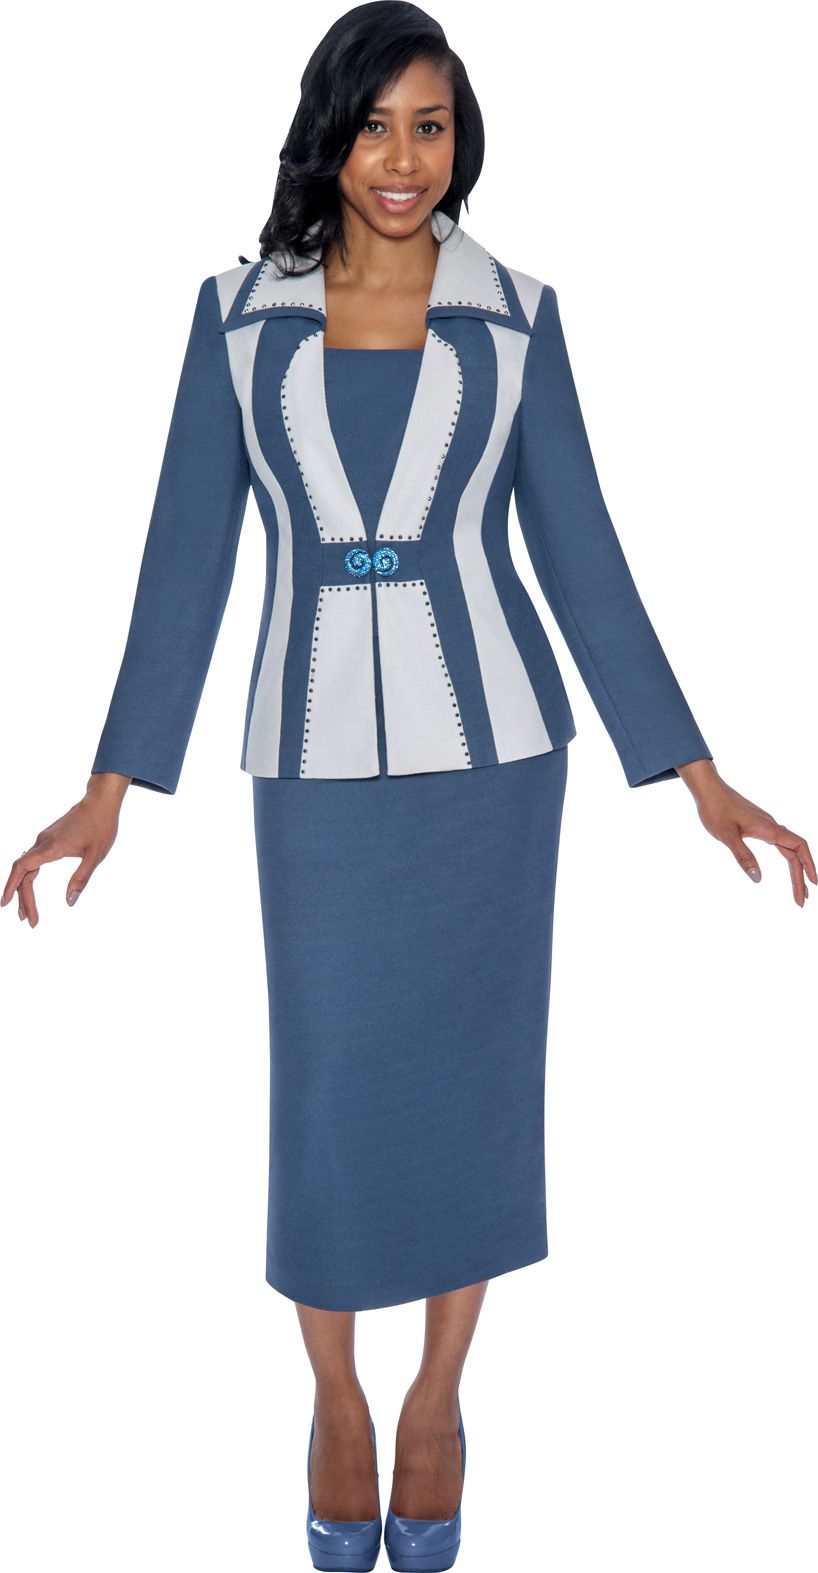 GMI GK5452 Womens Knit Color Block Suit: French Novelty